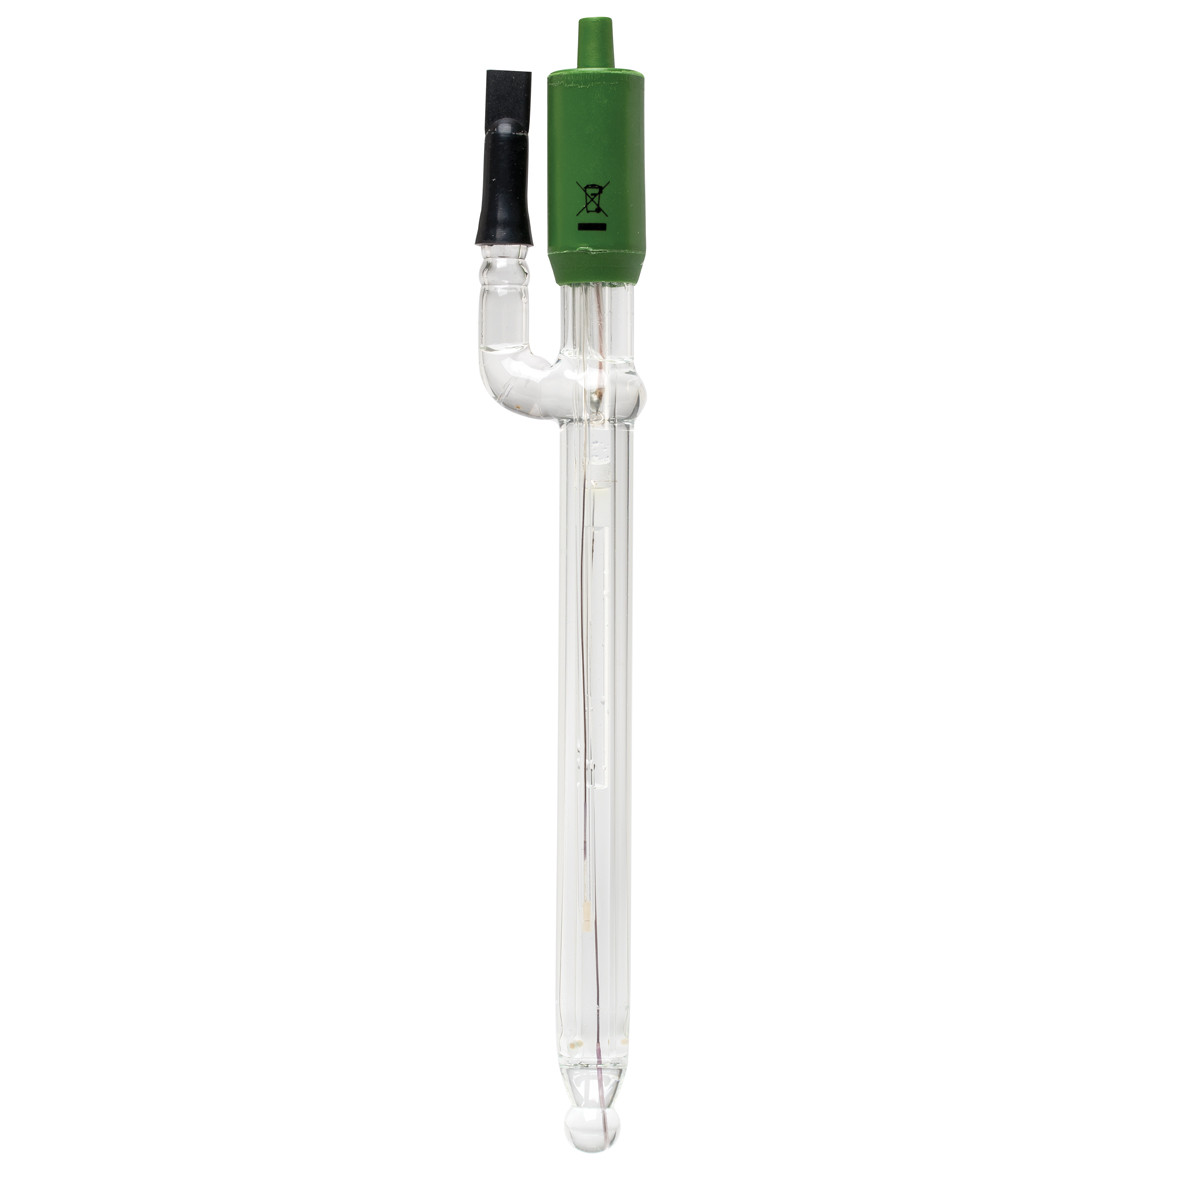 Refillable pH Electrode with Side Arm Construction and BNC Connector